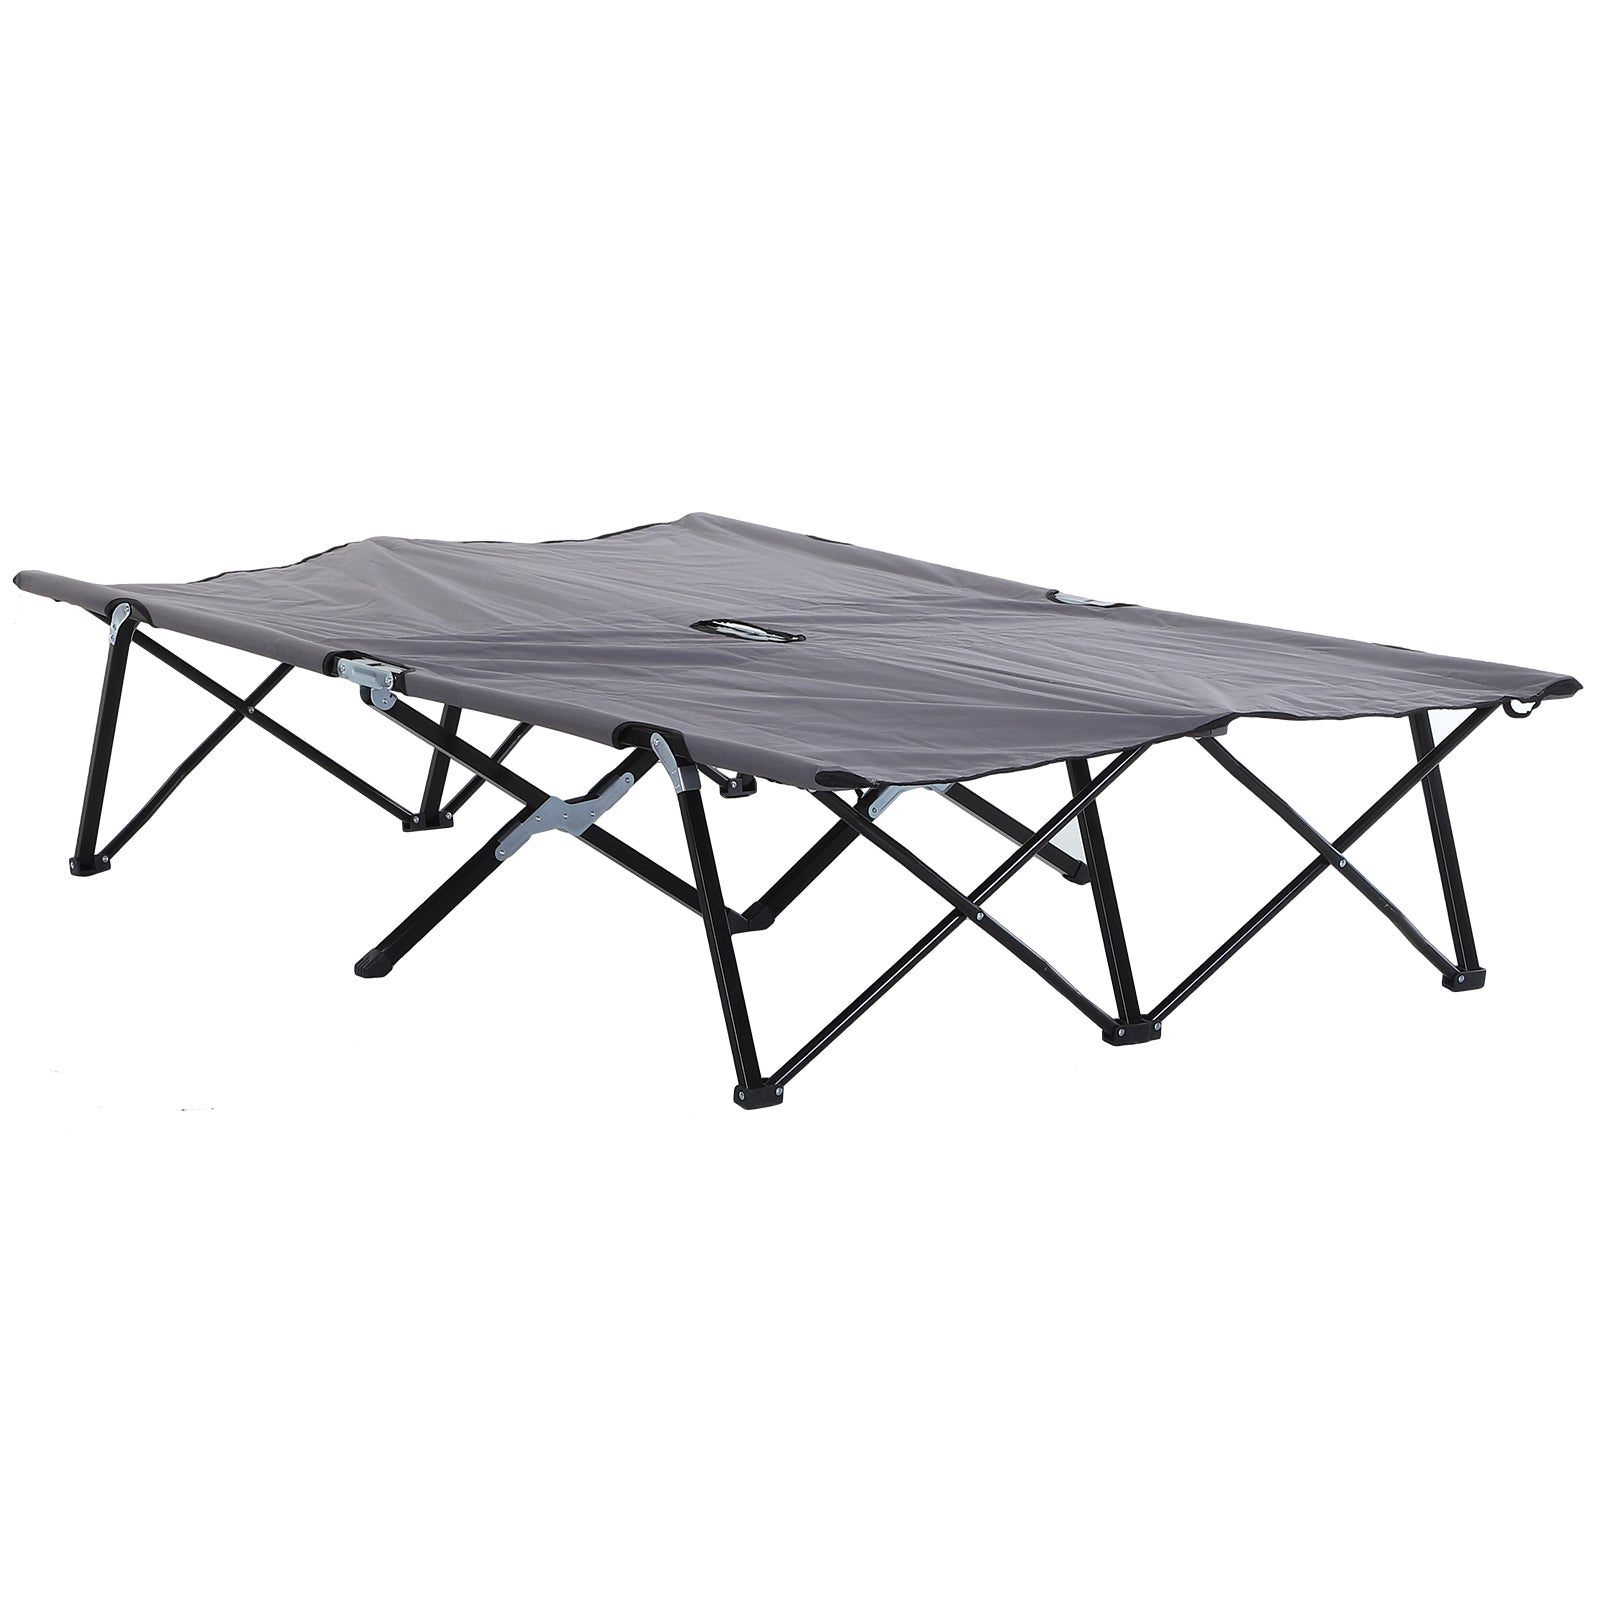 76" Two Person Folding Camping Cot Outdoor Portable Double Cot Wide Military Sleeping Bed w/ Carrying Bag Grey at Gallery Canada